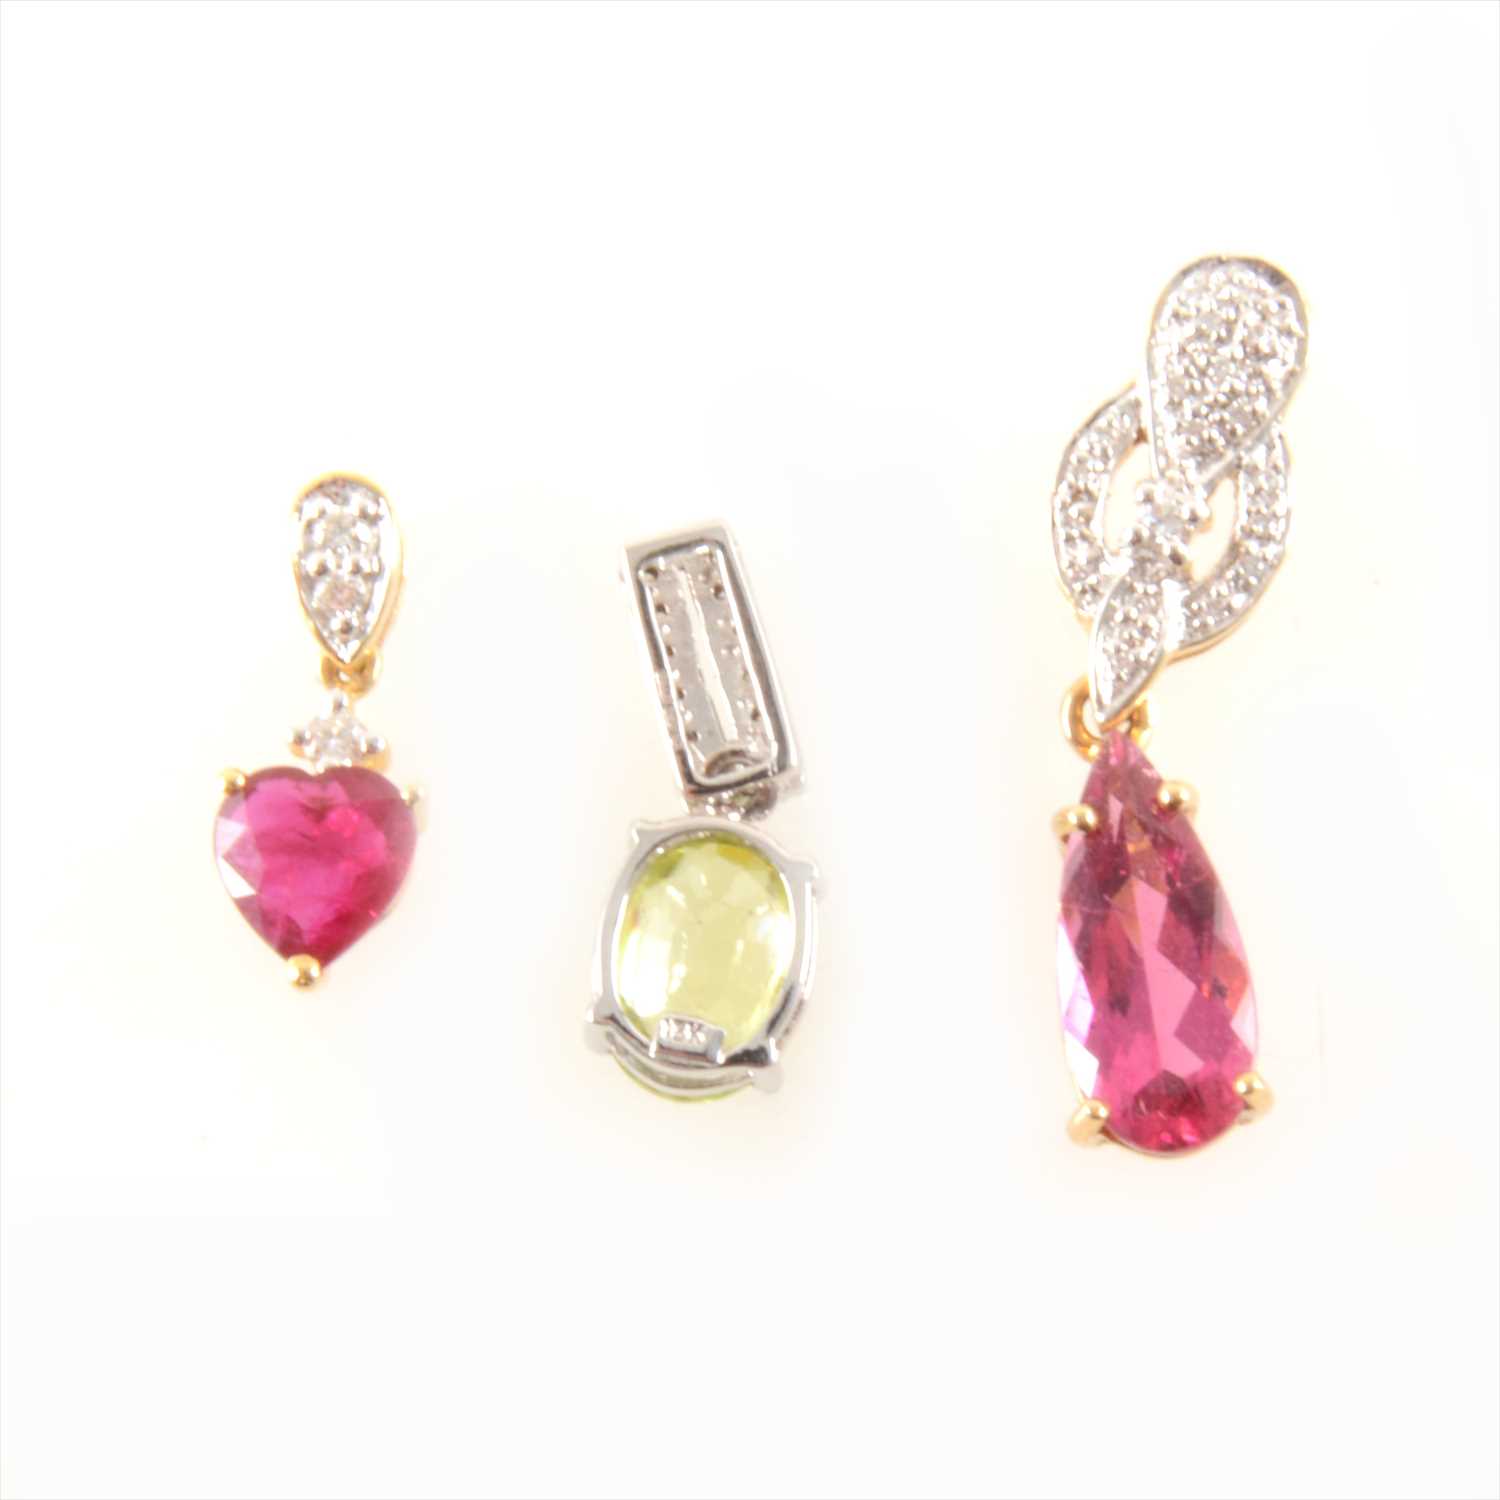 Lot 325 - A Burmese ruby and diamond pendant, and two other gemset pendant drops